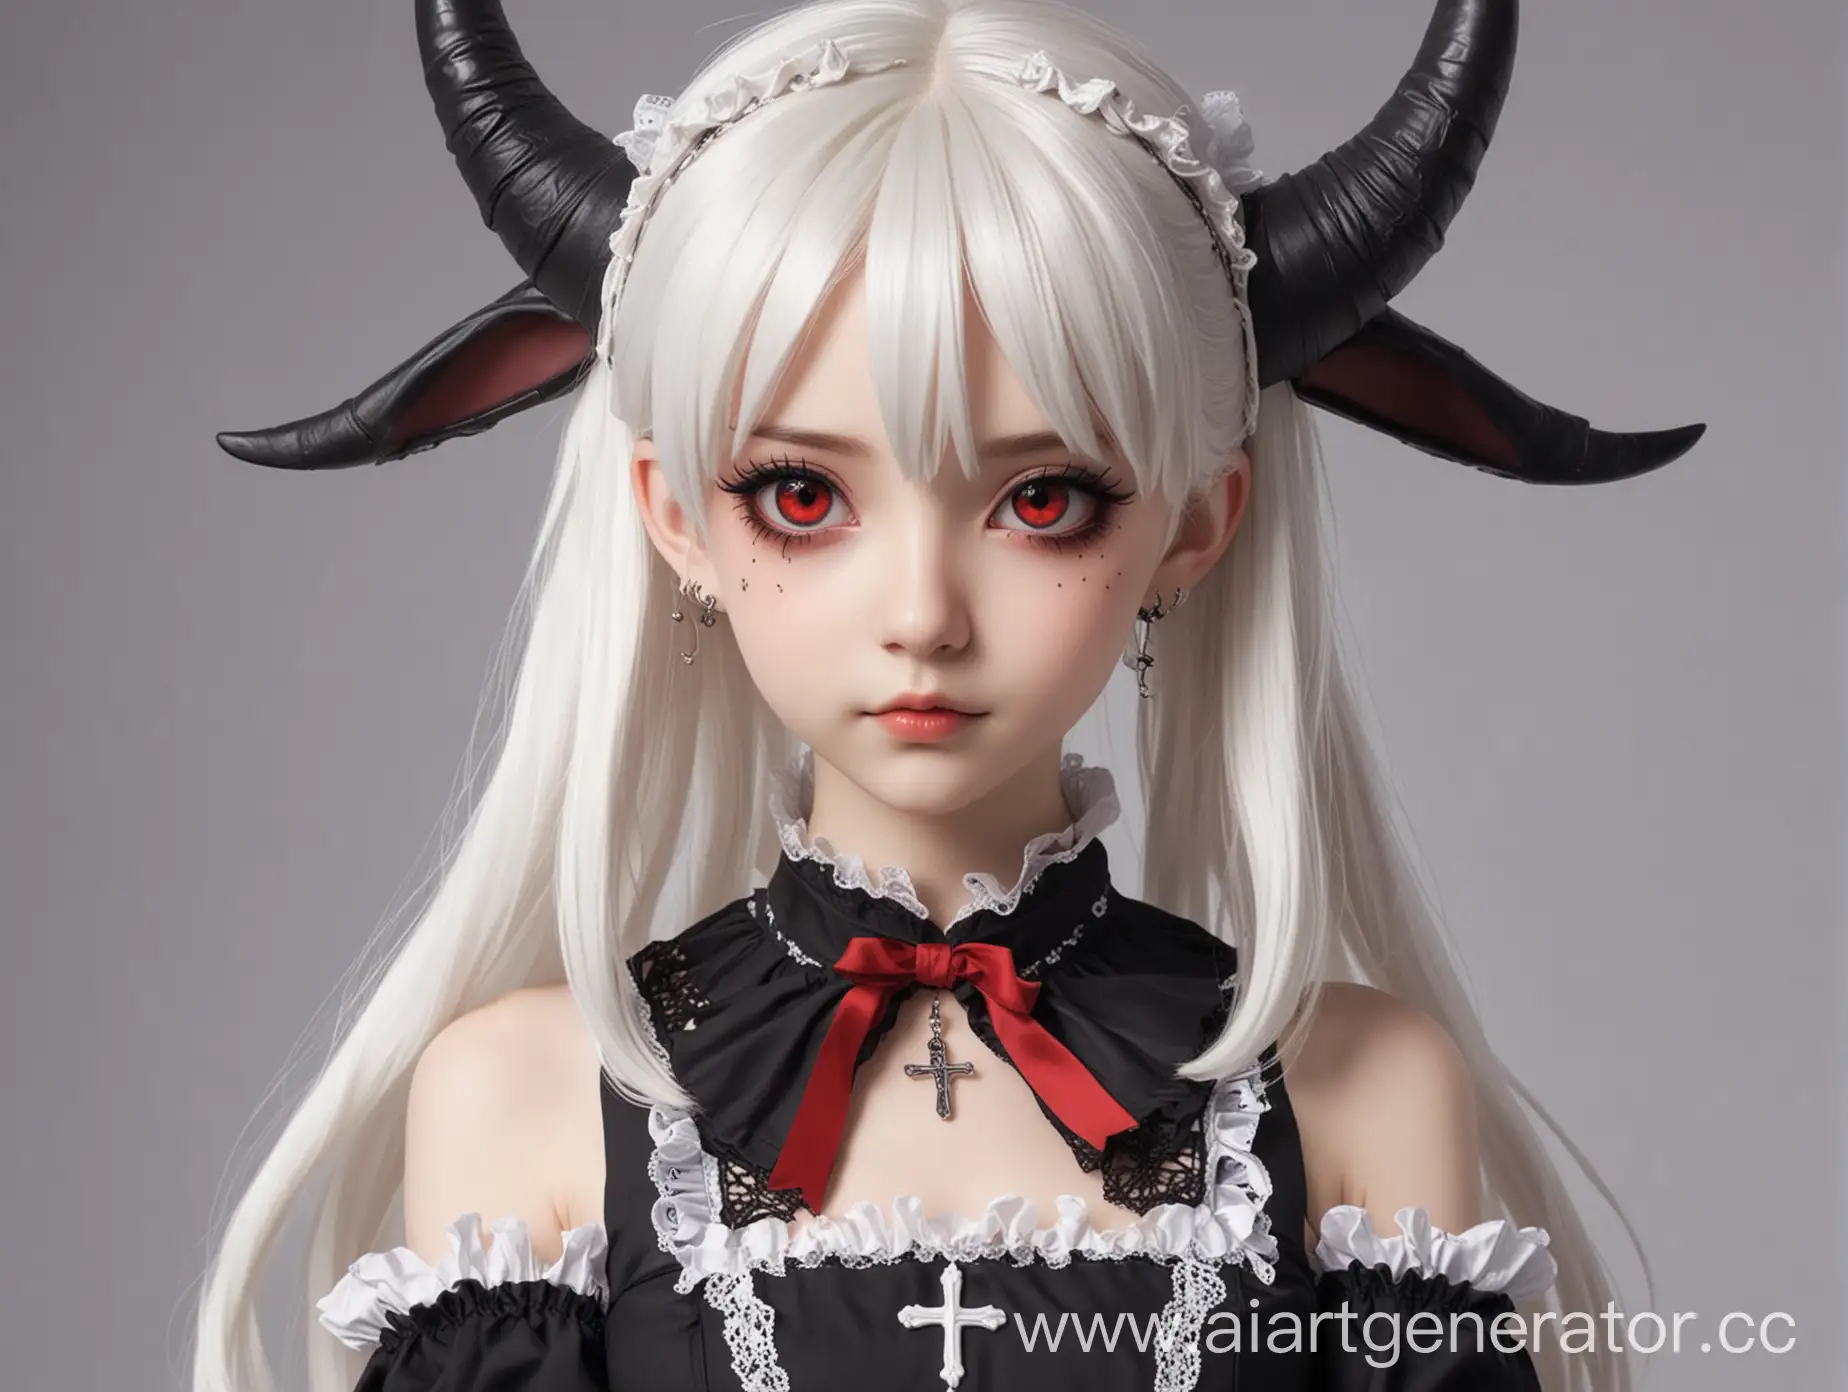 Anime-Girl-with-Black-Horns-and-Cross-Gothic-Lolita-Fashion